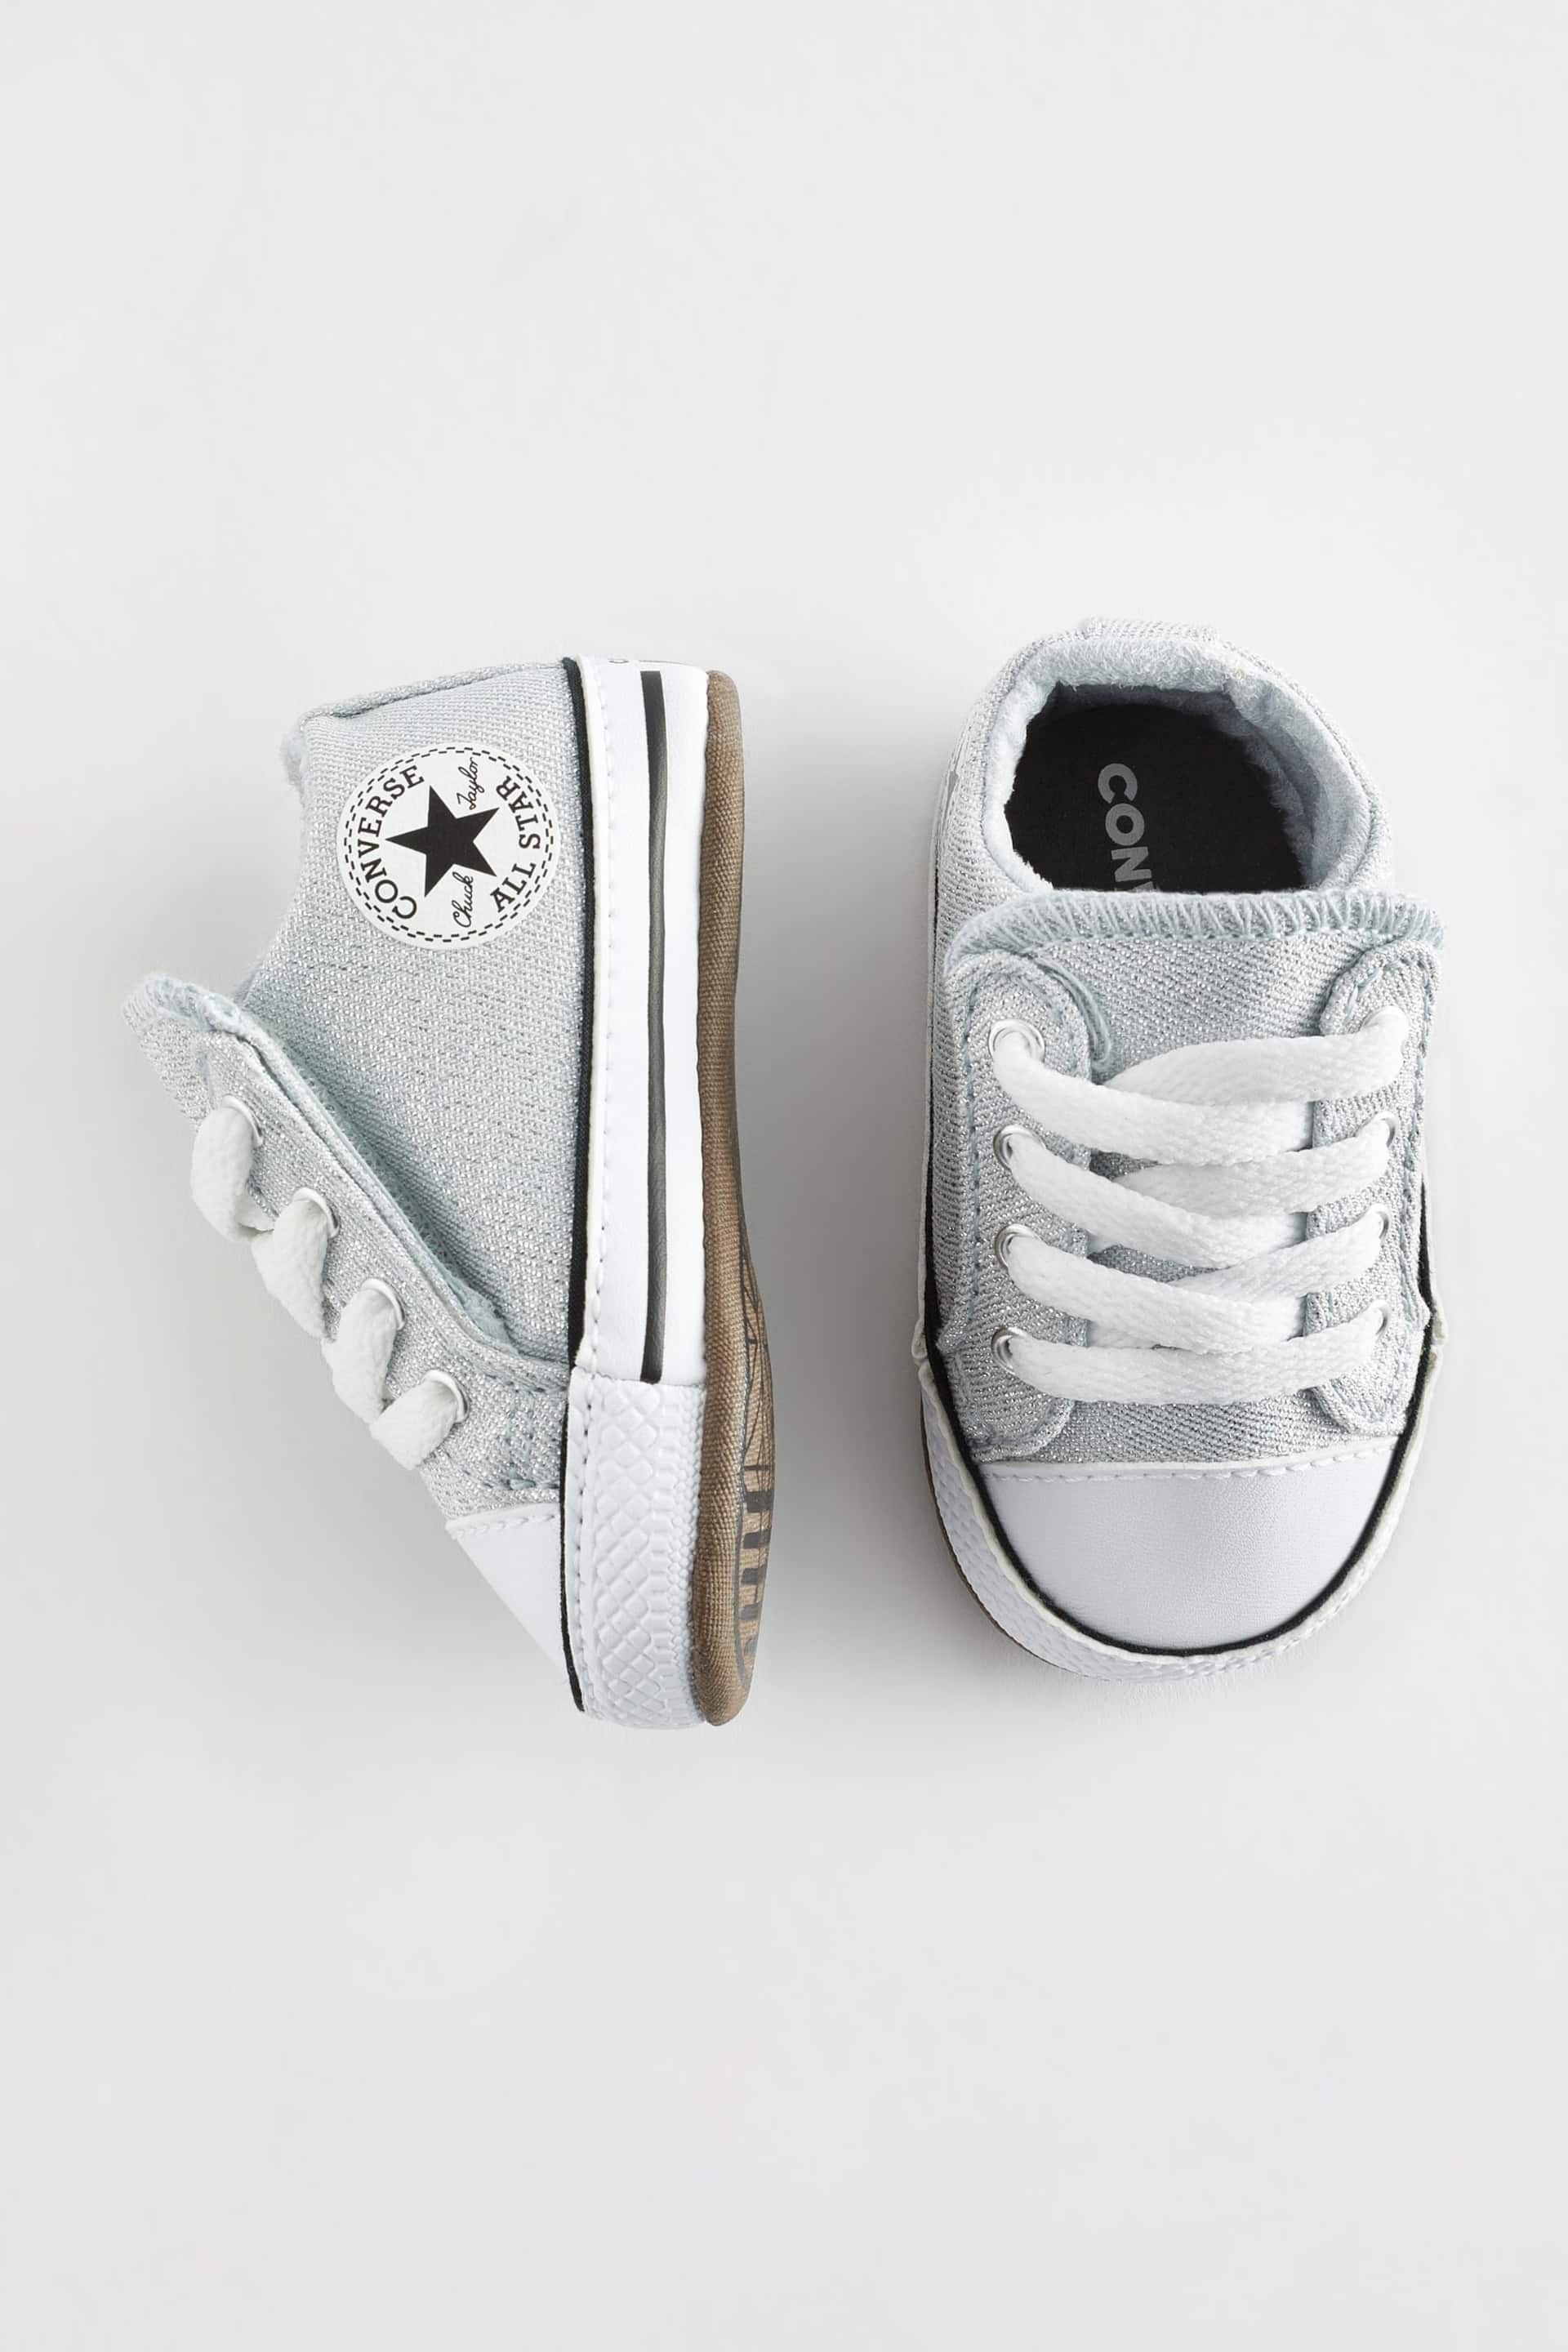 Converse White Chuck Taylor All Star Glitter Pram Shoes - Image 5 of 9